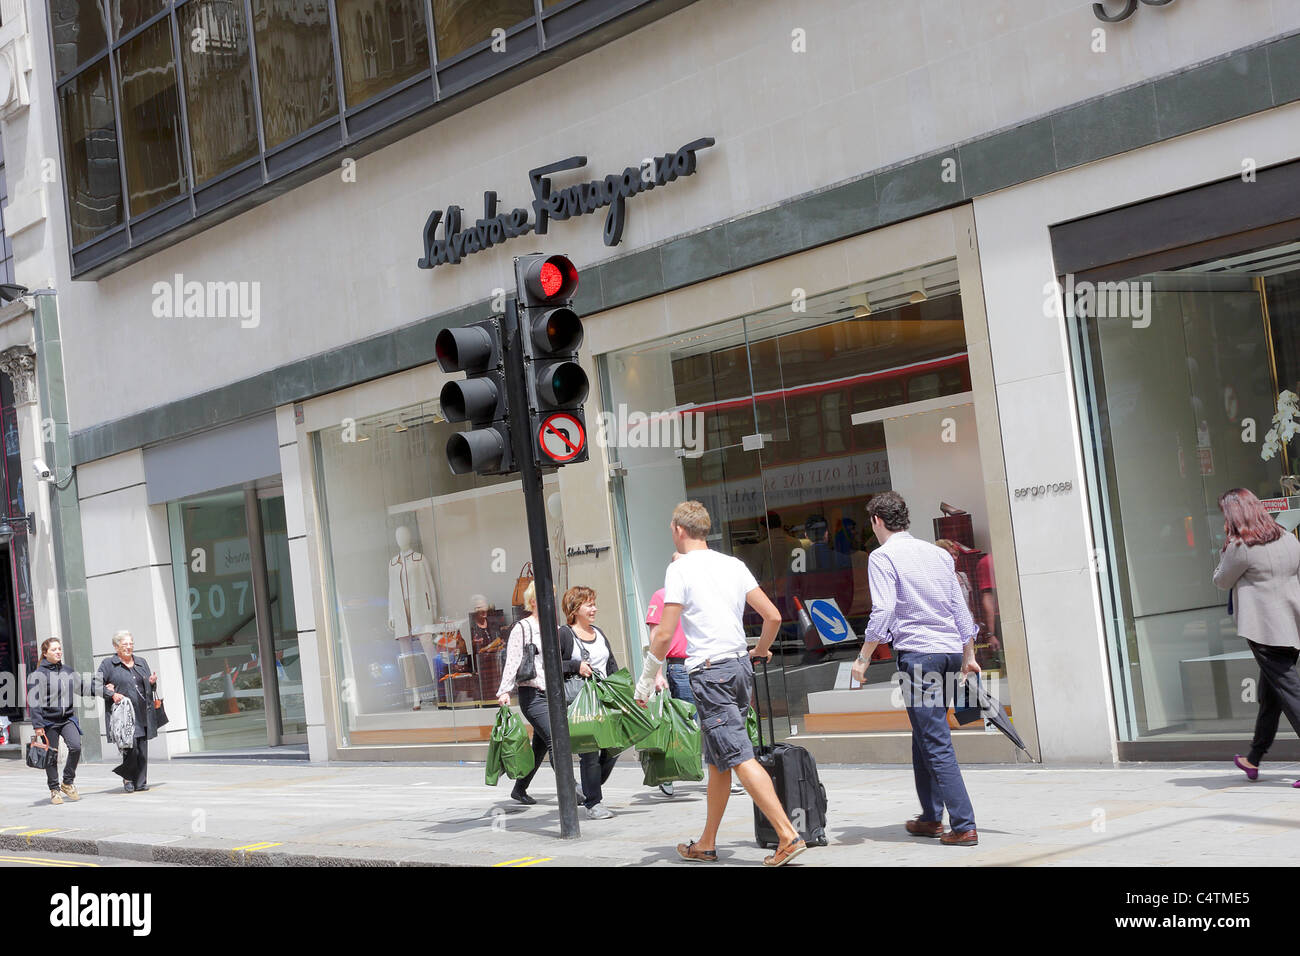 Salvatore ferragamo outlet hi-res stock photography and images - Alamy